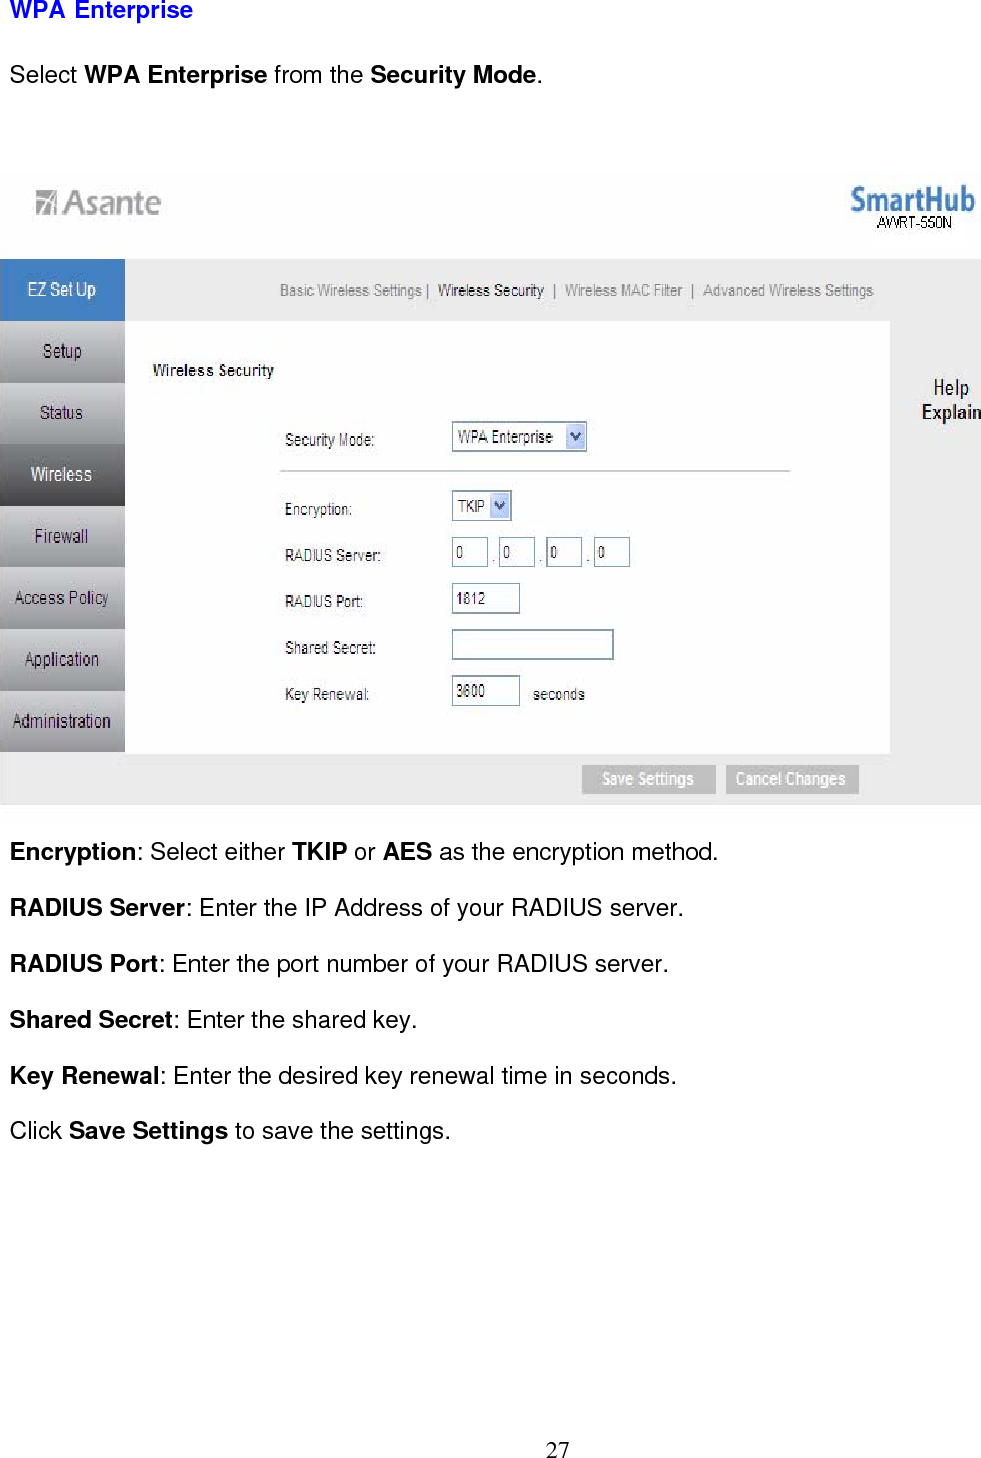  27WPA Enterprise Select WPA Enterprise from the Security Mode.  Encryption: Select either TKIP or AES as the encryption method. RADIUS Server: Enter the IP Address of your RADIUS server. RADIUS Port: Enter the port number of your RADIUS server. Shared Secret: Enter the shared key. Key Renewal: Enter the desired key renewal time in seconds. Click Save Settings to save the settings. 